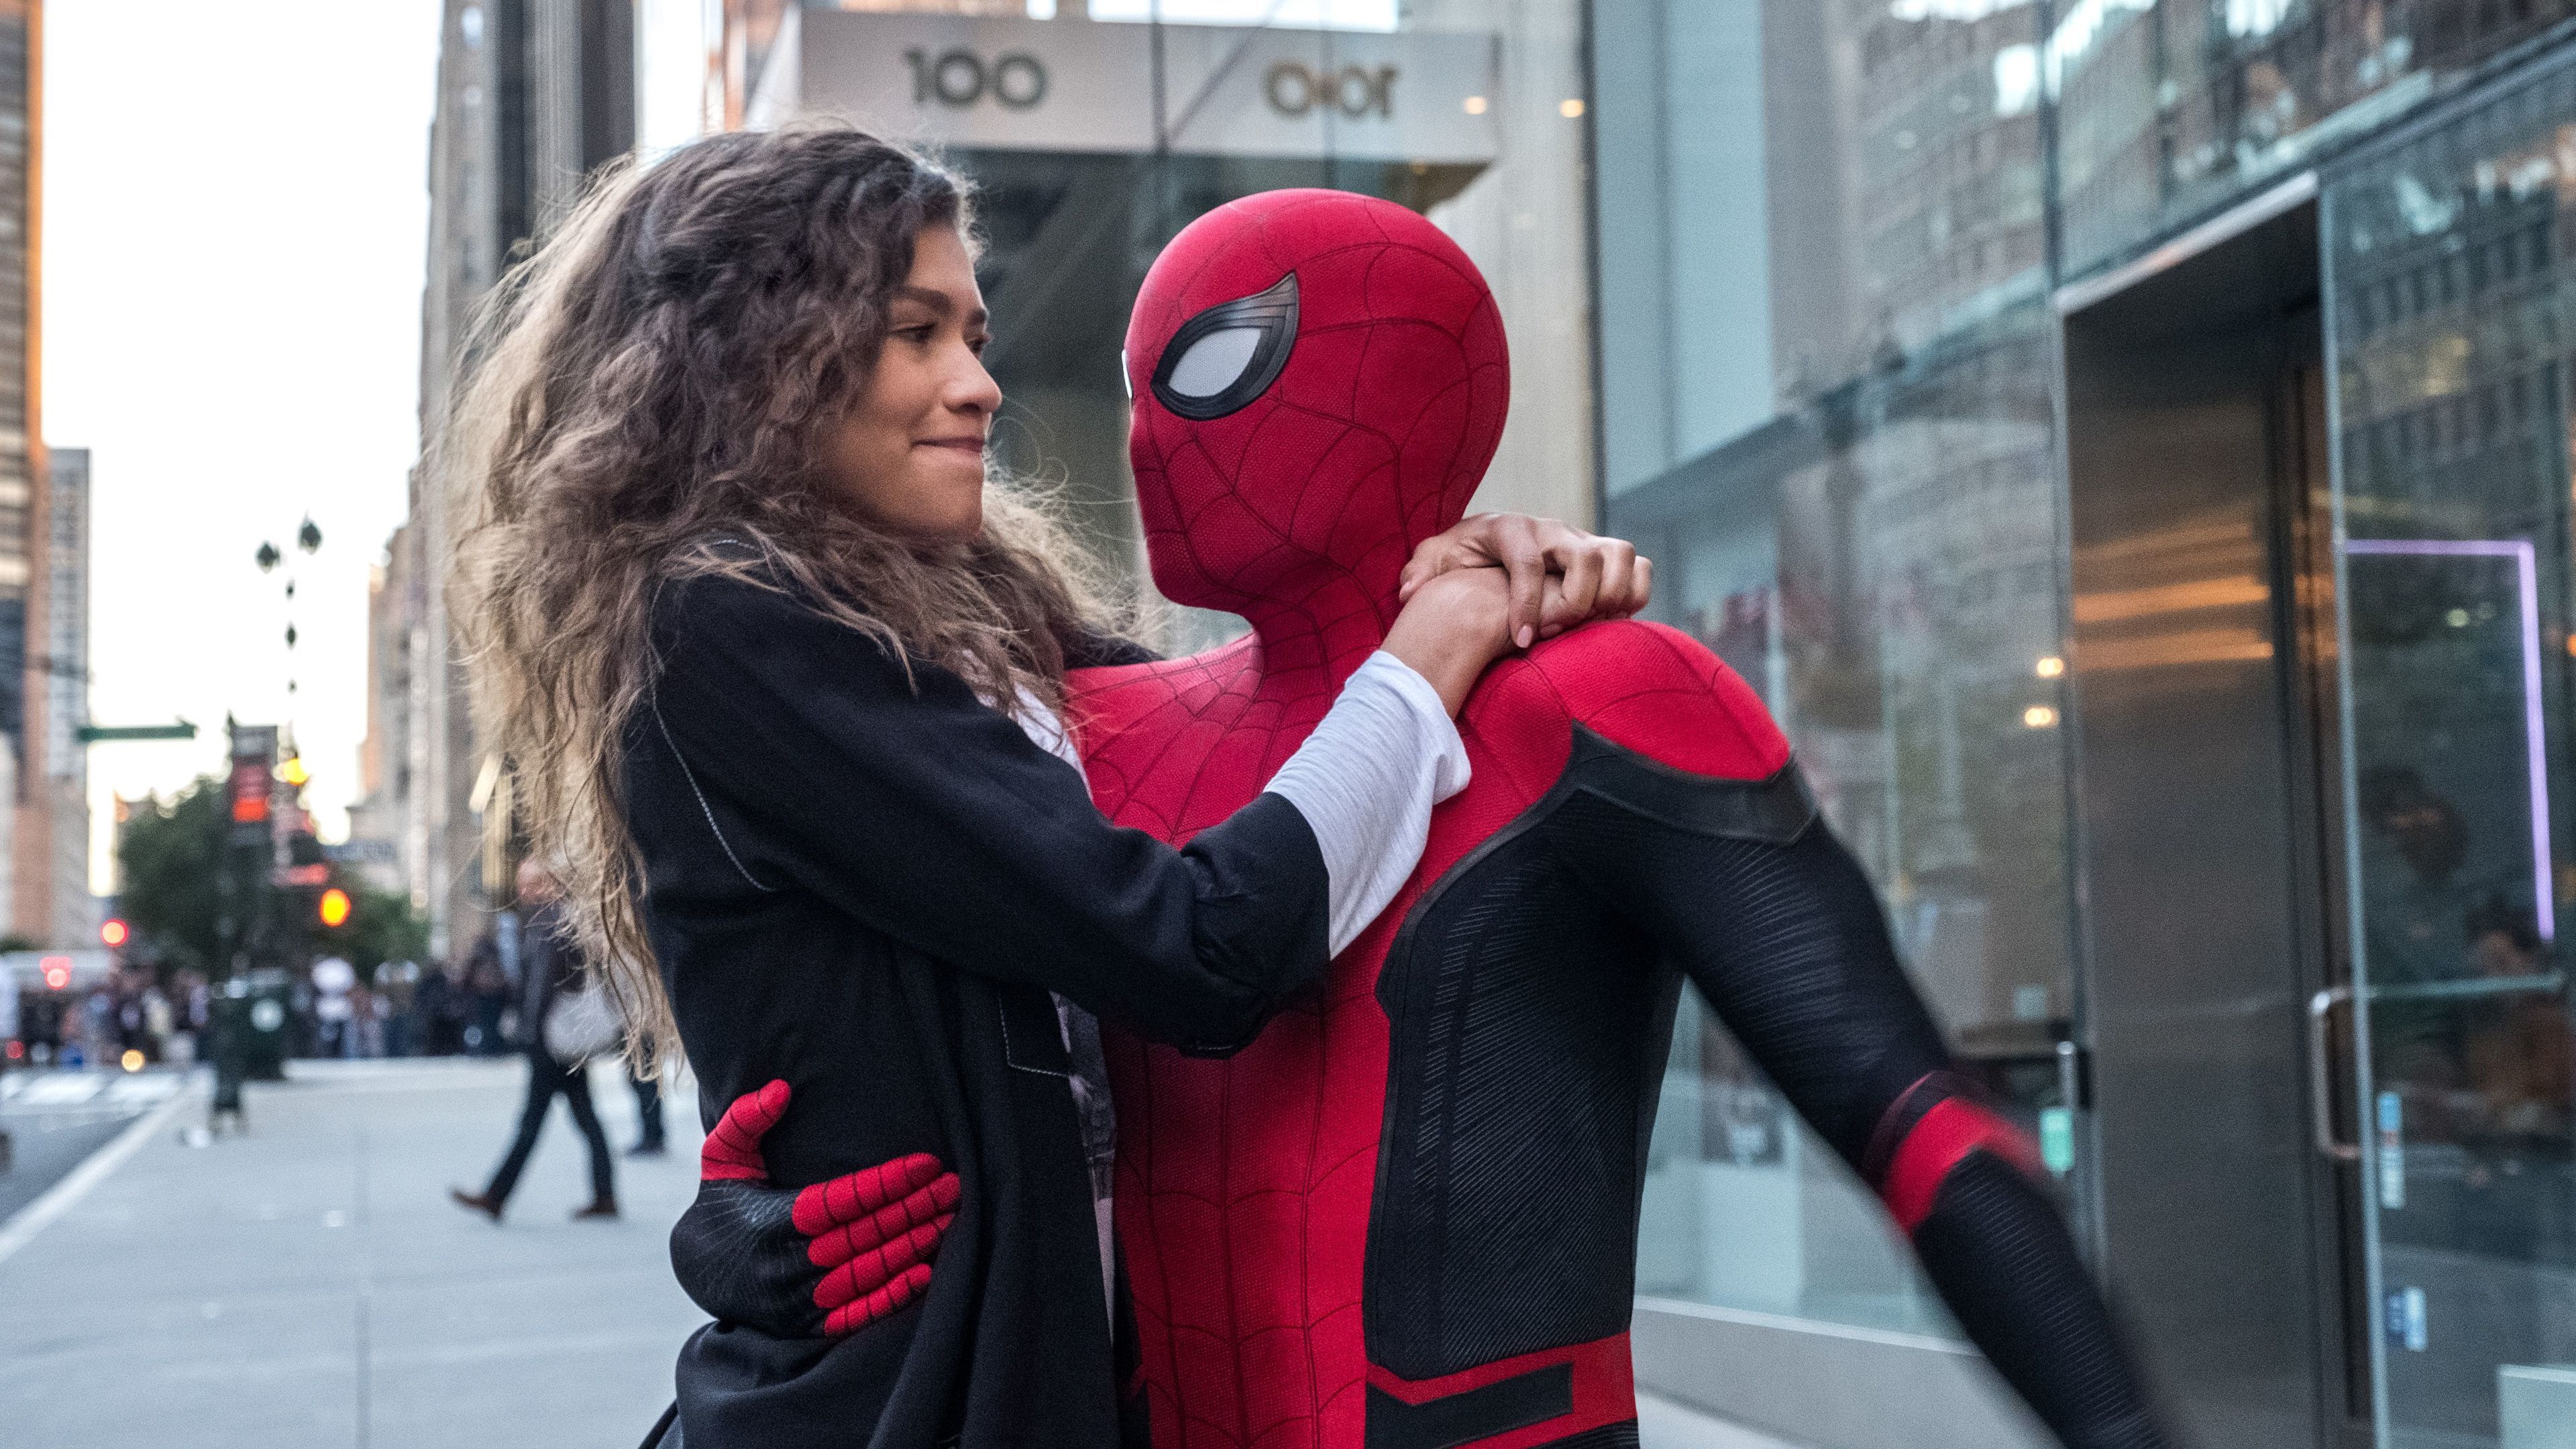 Spider Man And Zendaya In Spider Man Far From Home 2019 4k tom holland wallpaper, superheroes wallpaper, spiderman wall. Superhero movies, Spiderman, Man movies